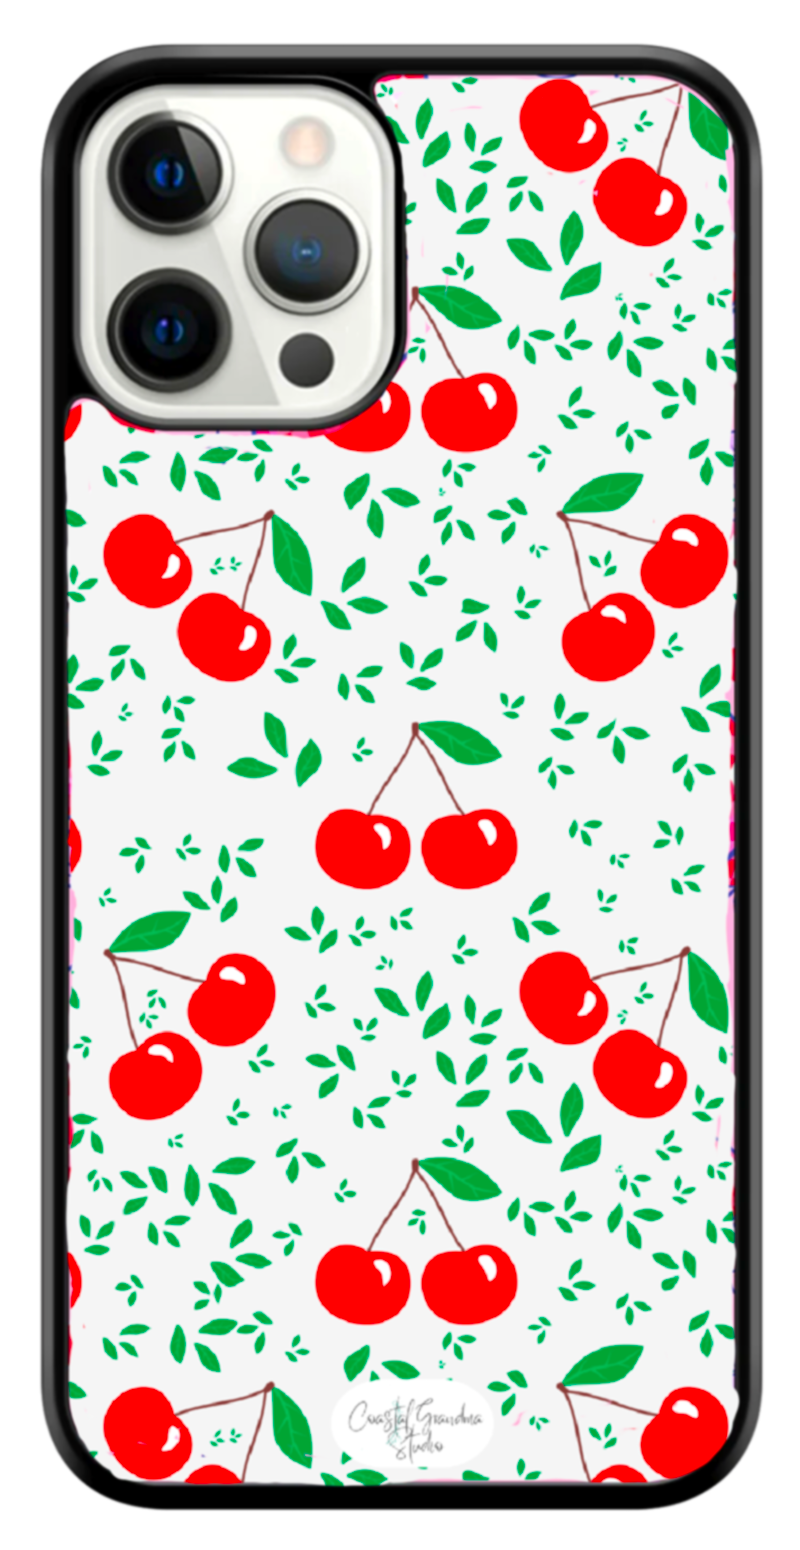 All the Cherries! (1104)